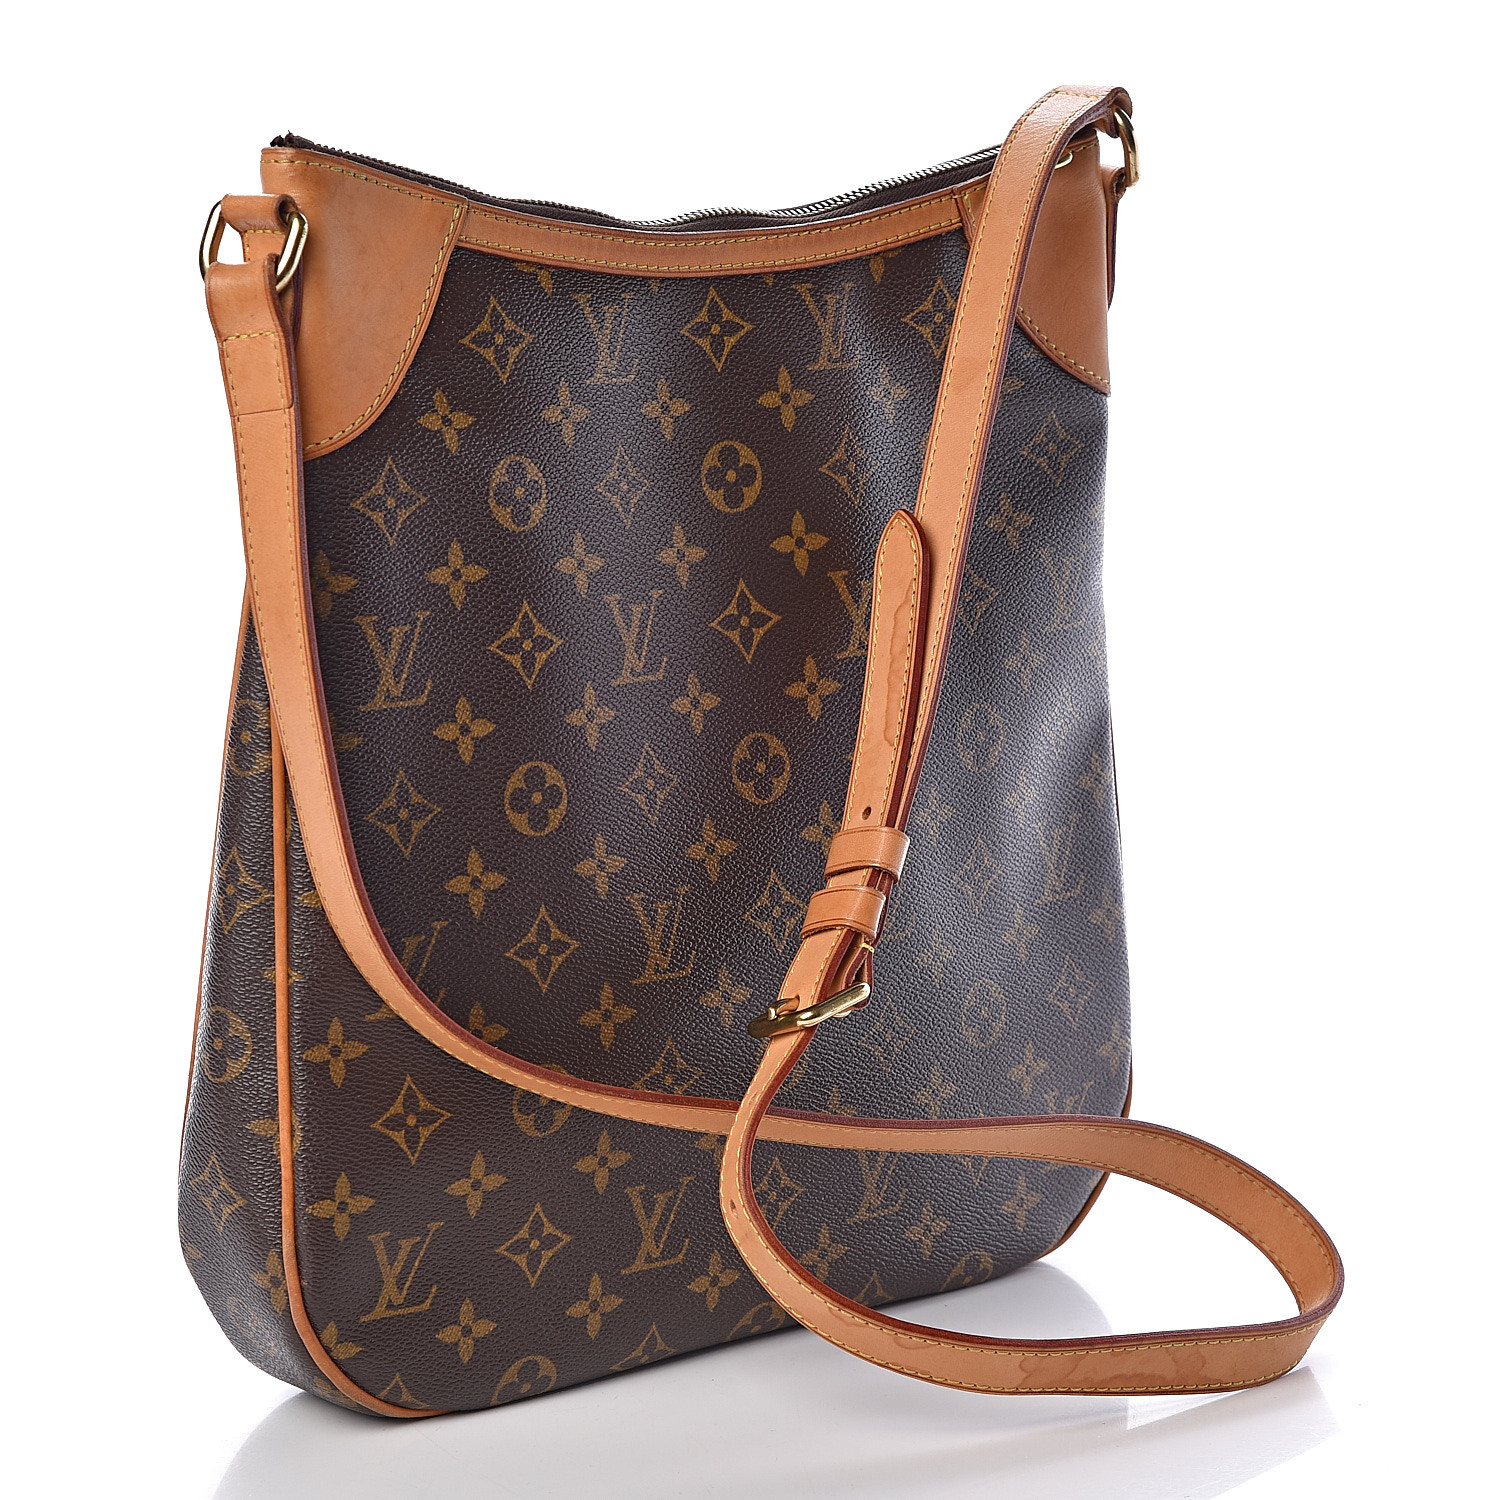 Louis Vuitton Odeon Mm Tote | Paul Smith